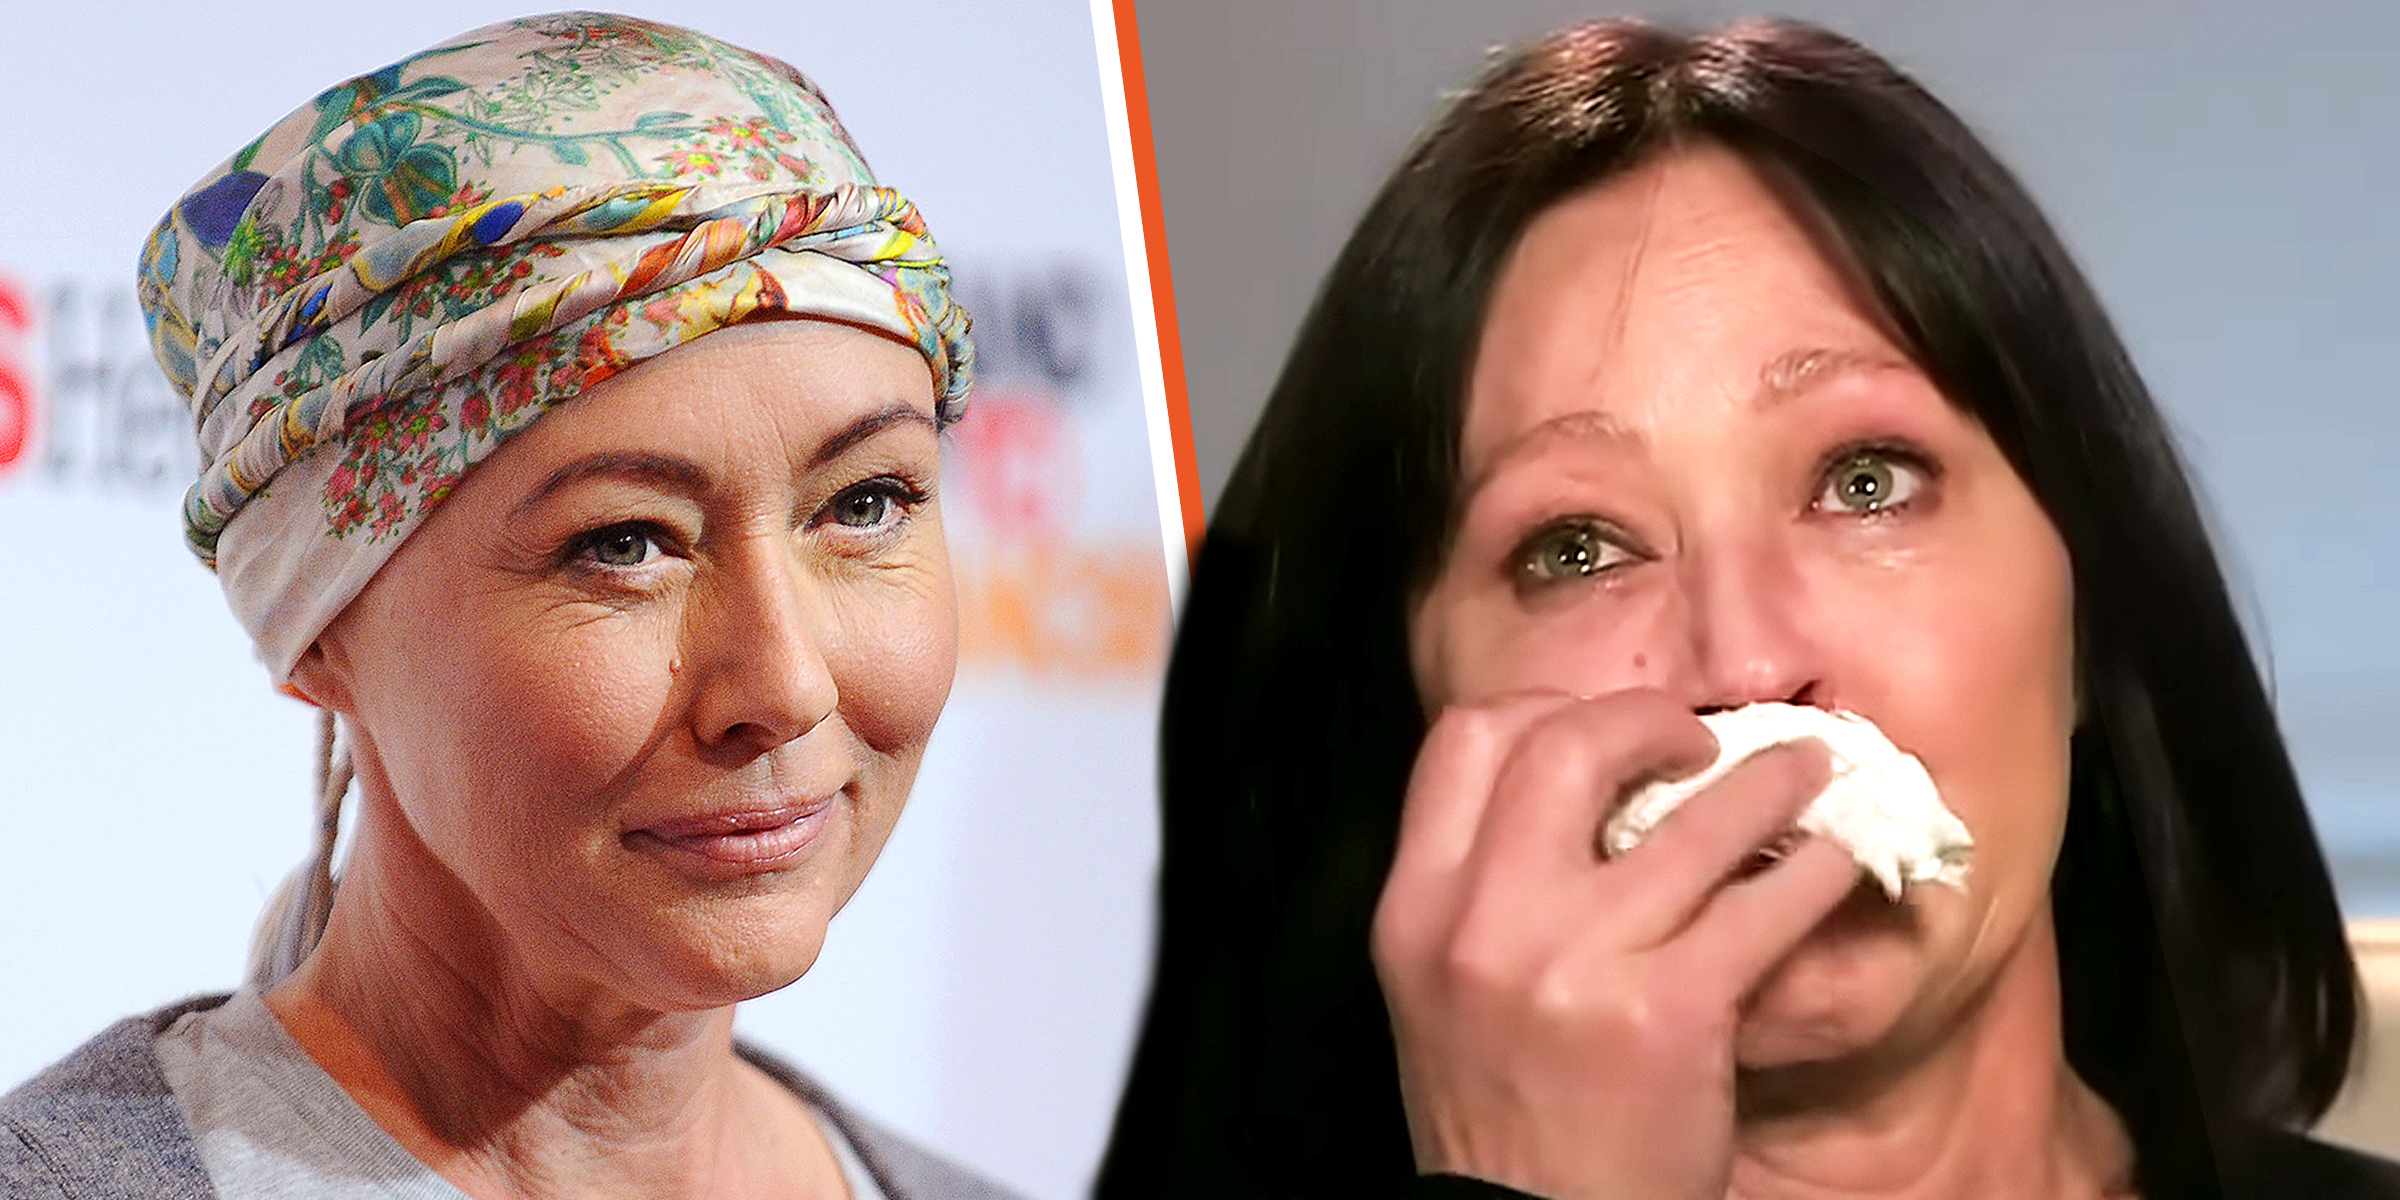 Shannen Doherty | Sources: Getty Images | youtube.com/ABCNews